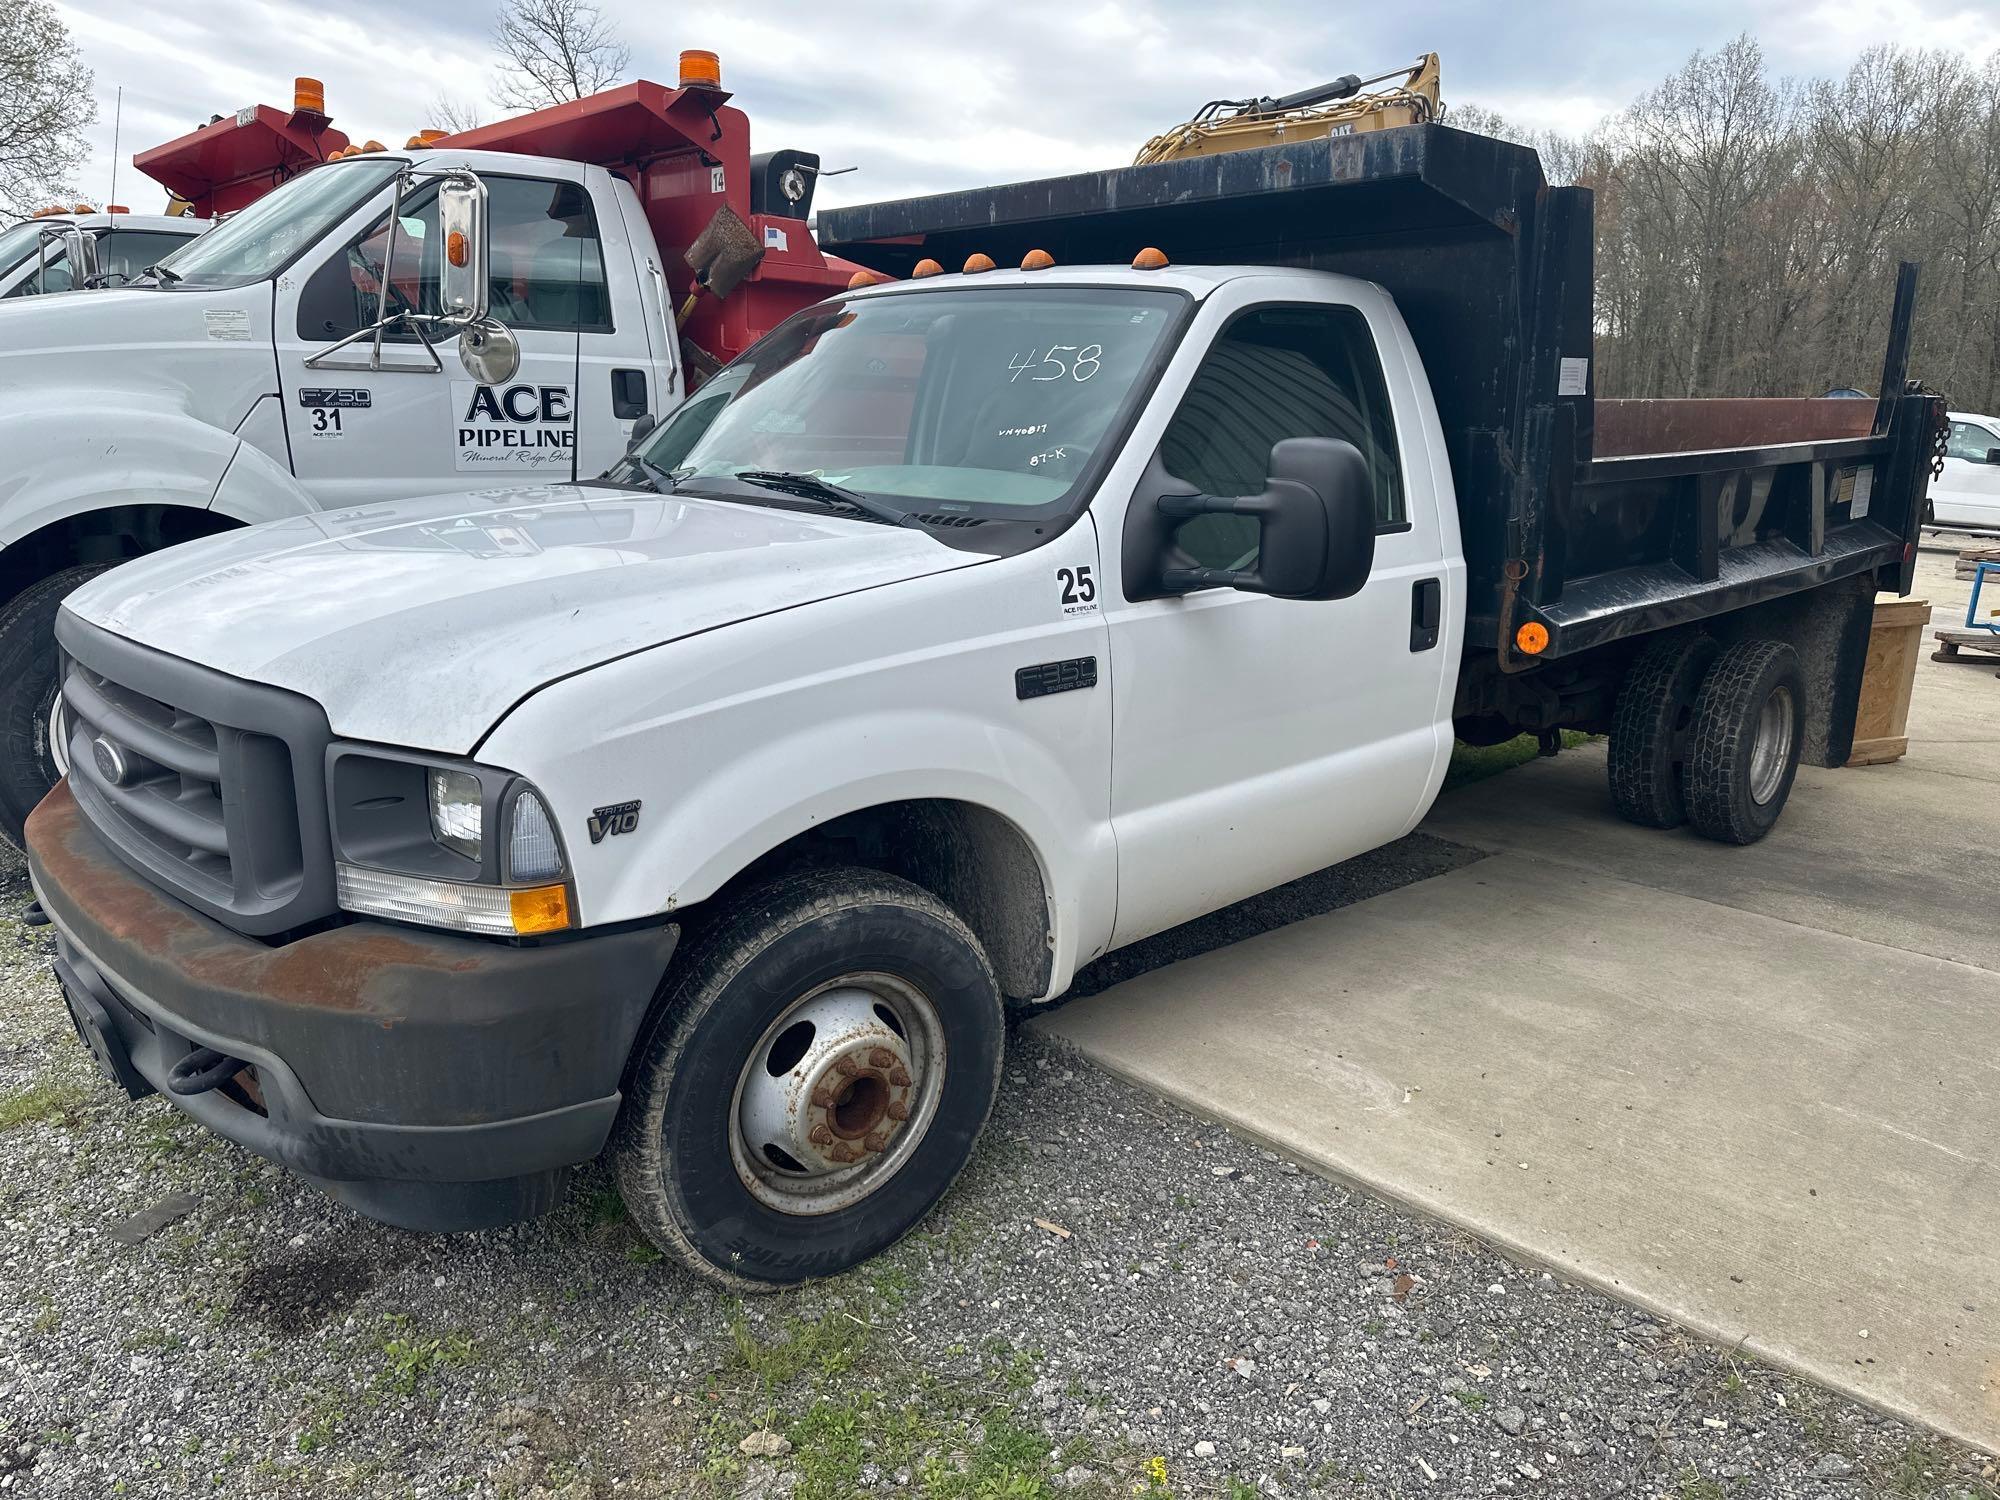 2002 FORD F350XL DUMP TRUCK VN:1FDWF36SX2EA40817 powered by Triton V10 gas engine, equipped with 6